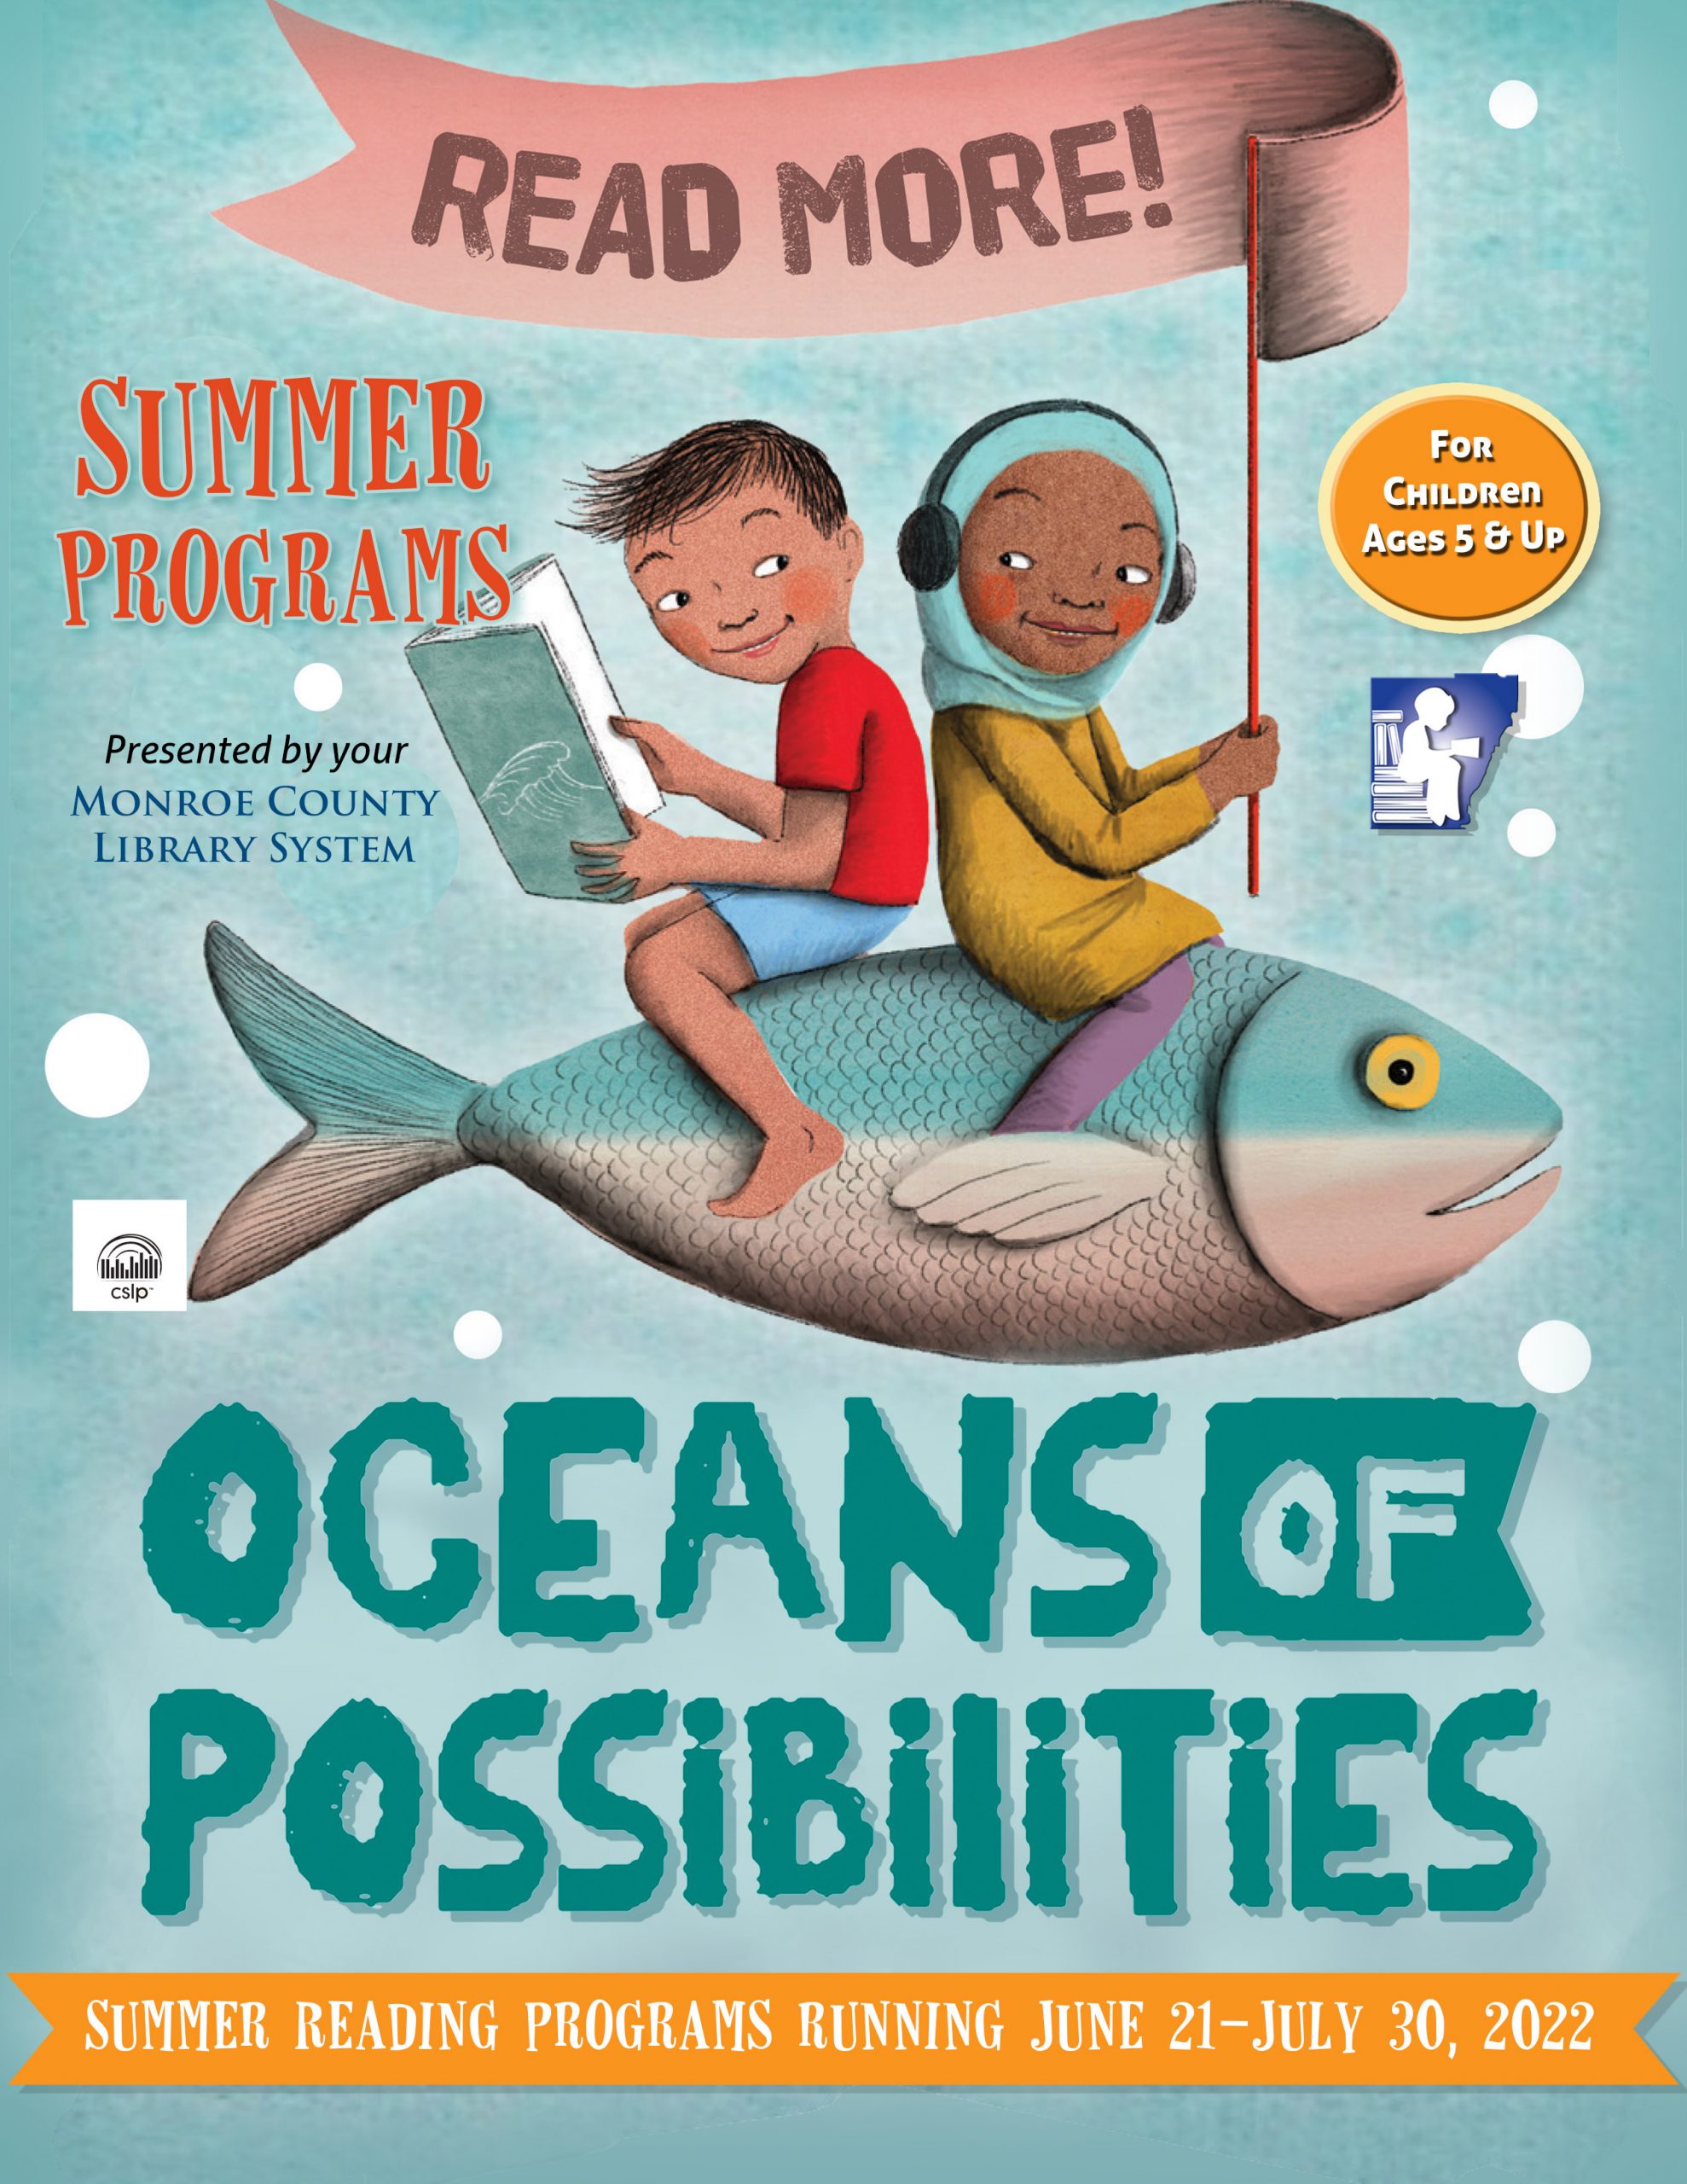 Two children riding a fish above the text "Ocean of Possibilities"